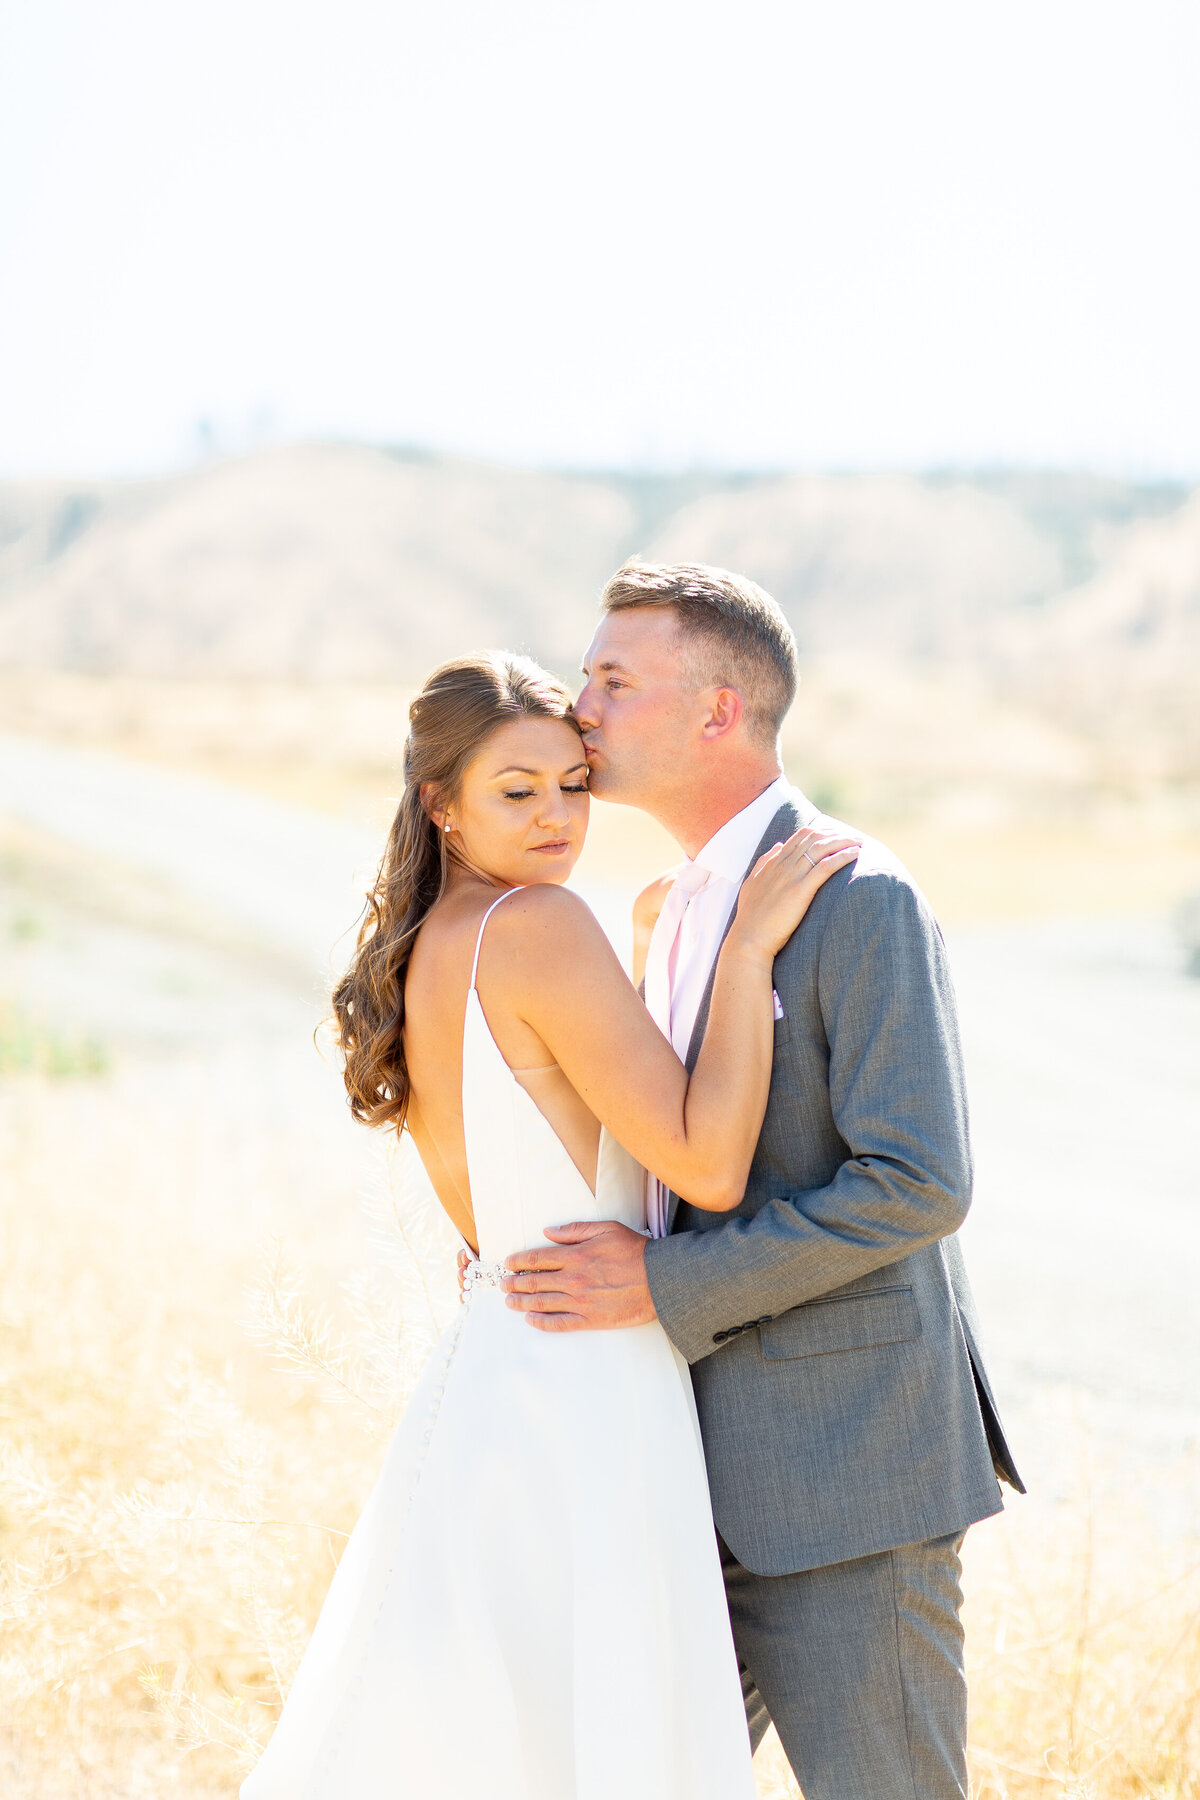 Will & Betsy | Potraits | Emily Moller Photography | Lake Chelan Family Photographer1Q5A4305